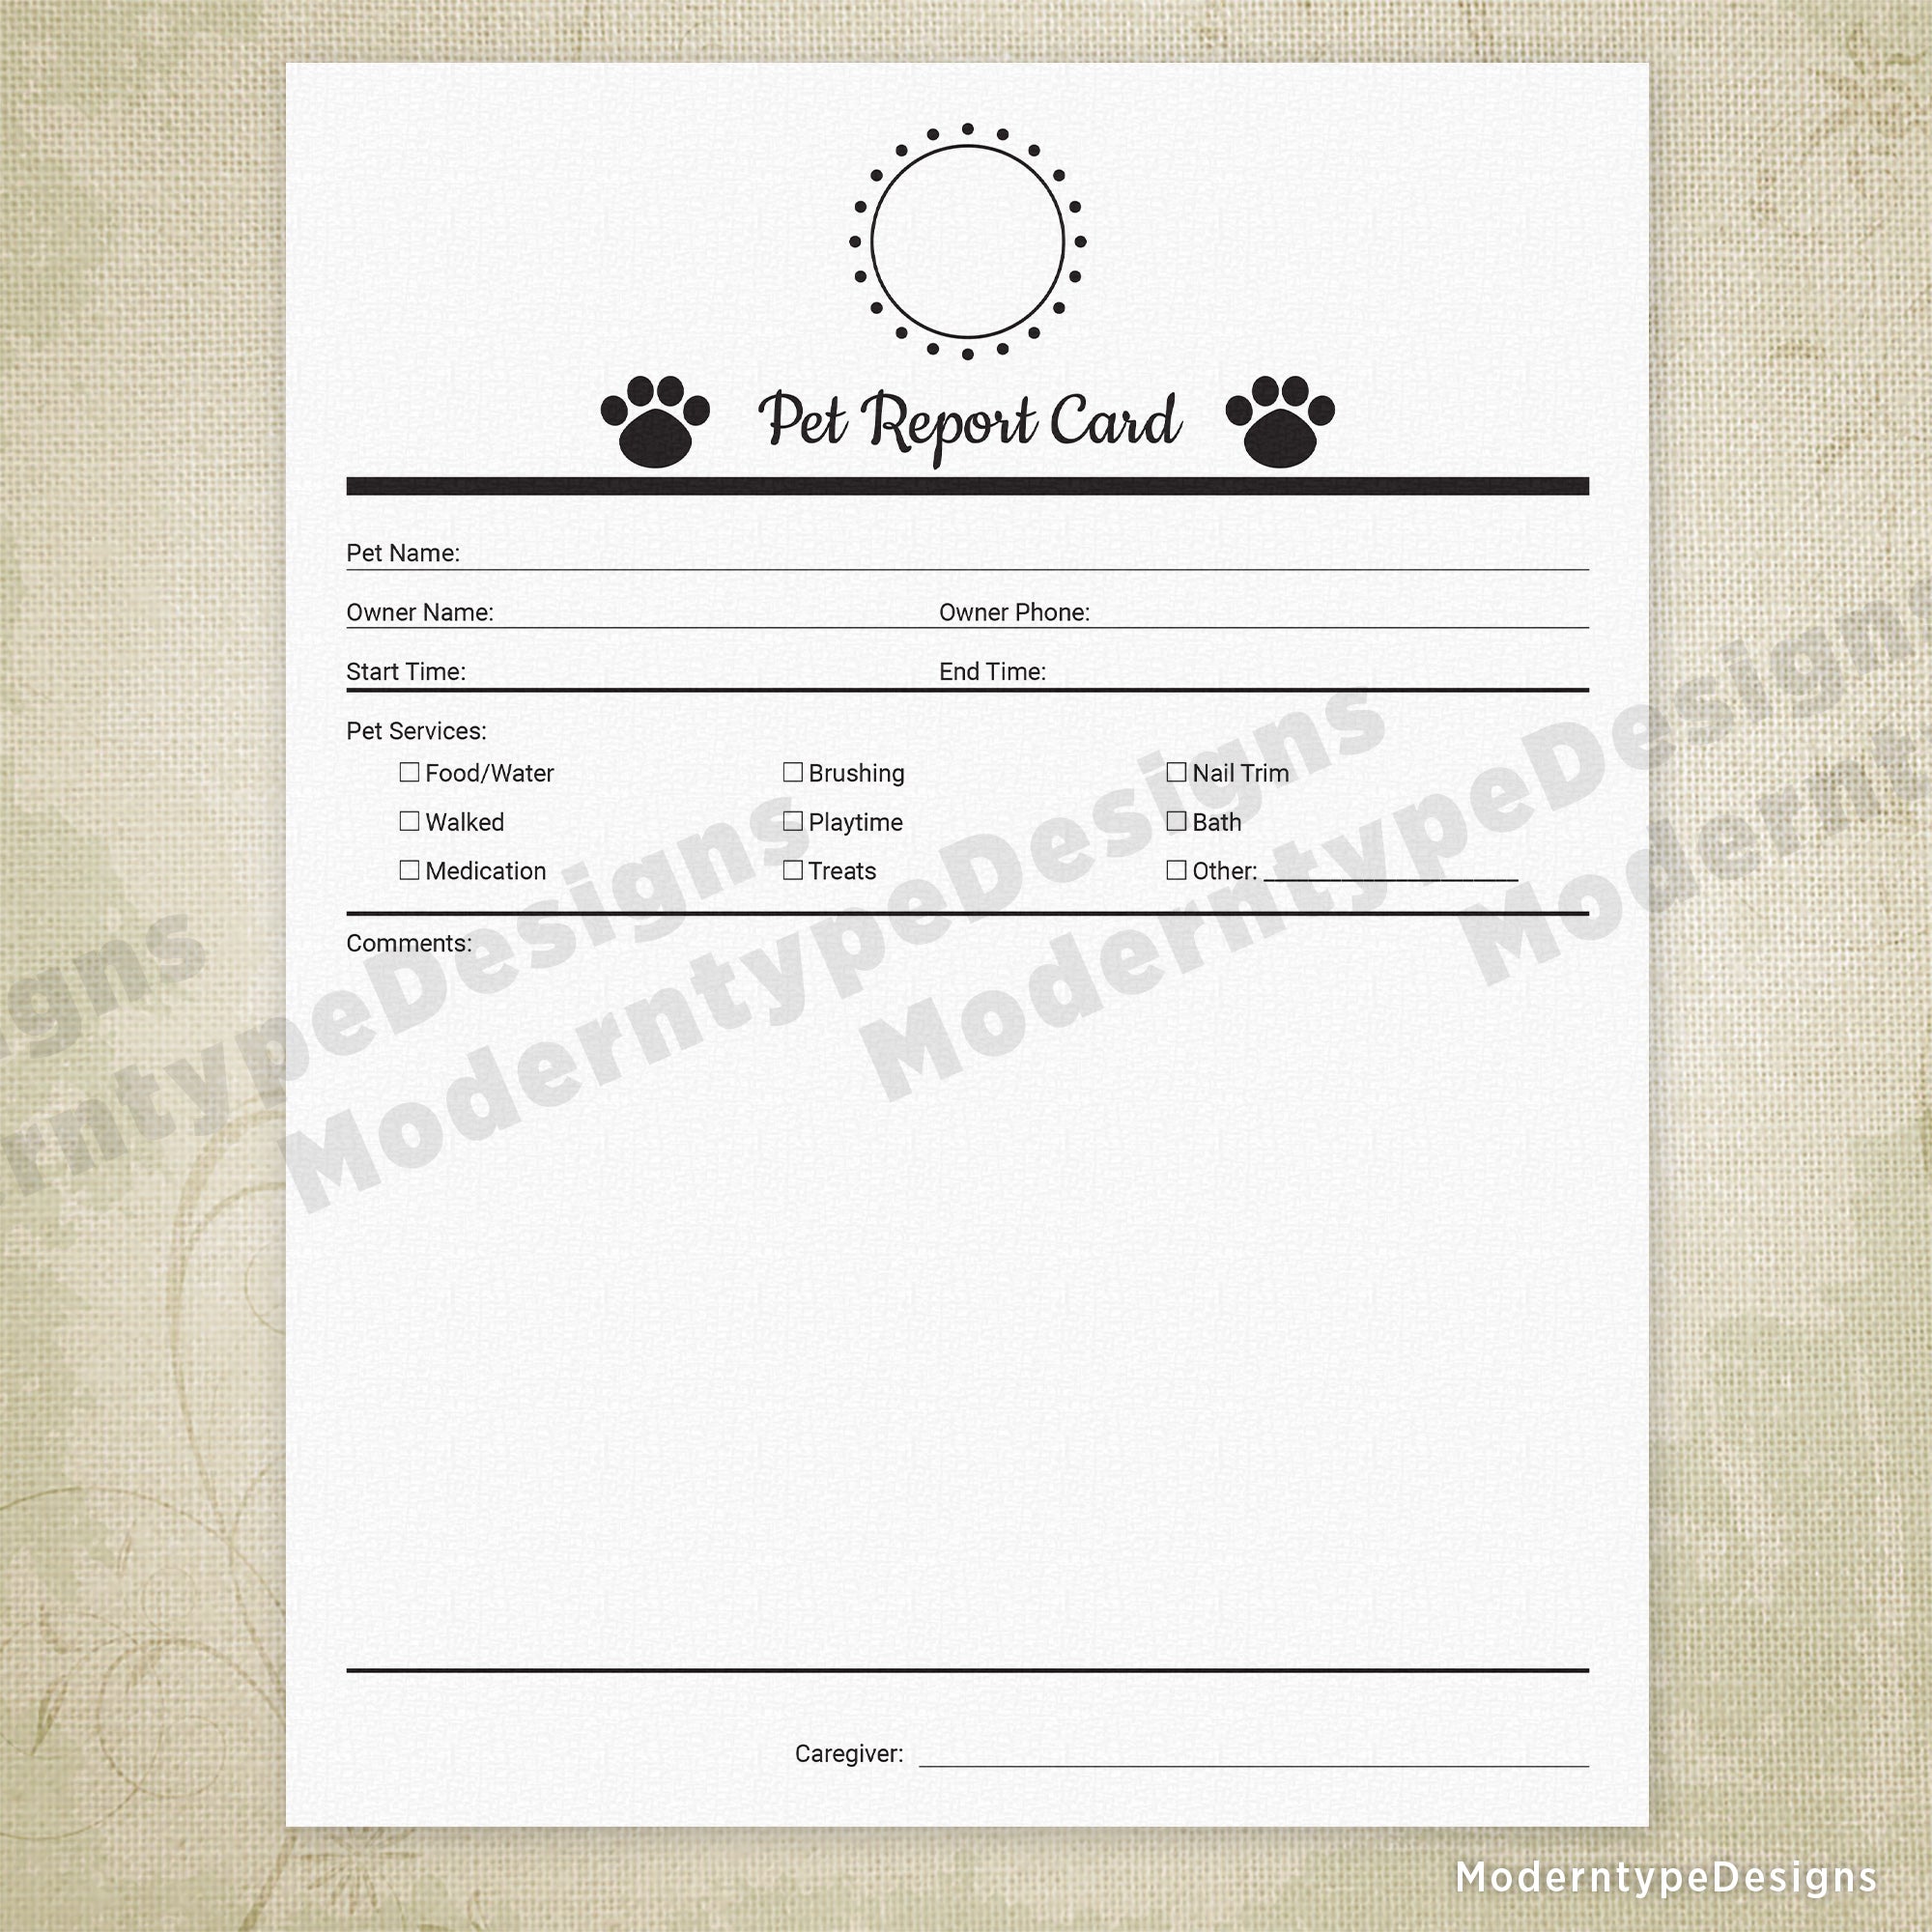 Pet Report Card Printable Form for Pet Businesses